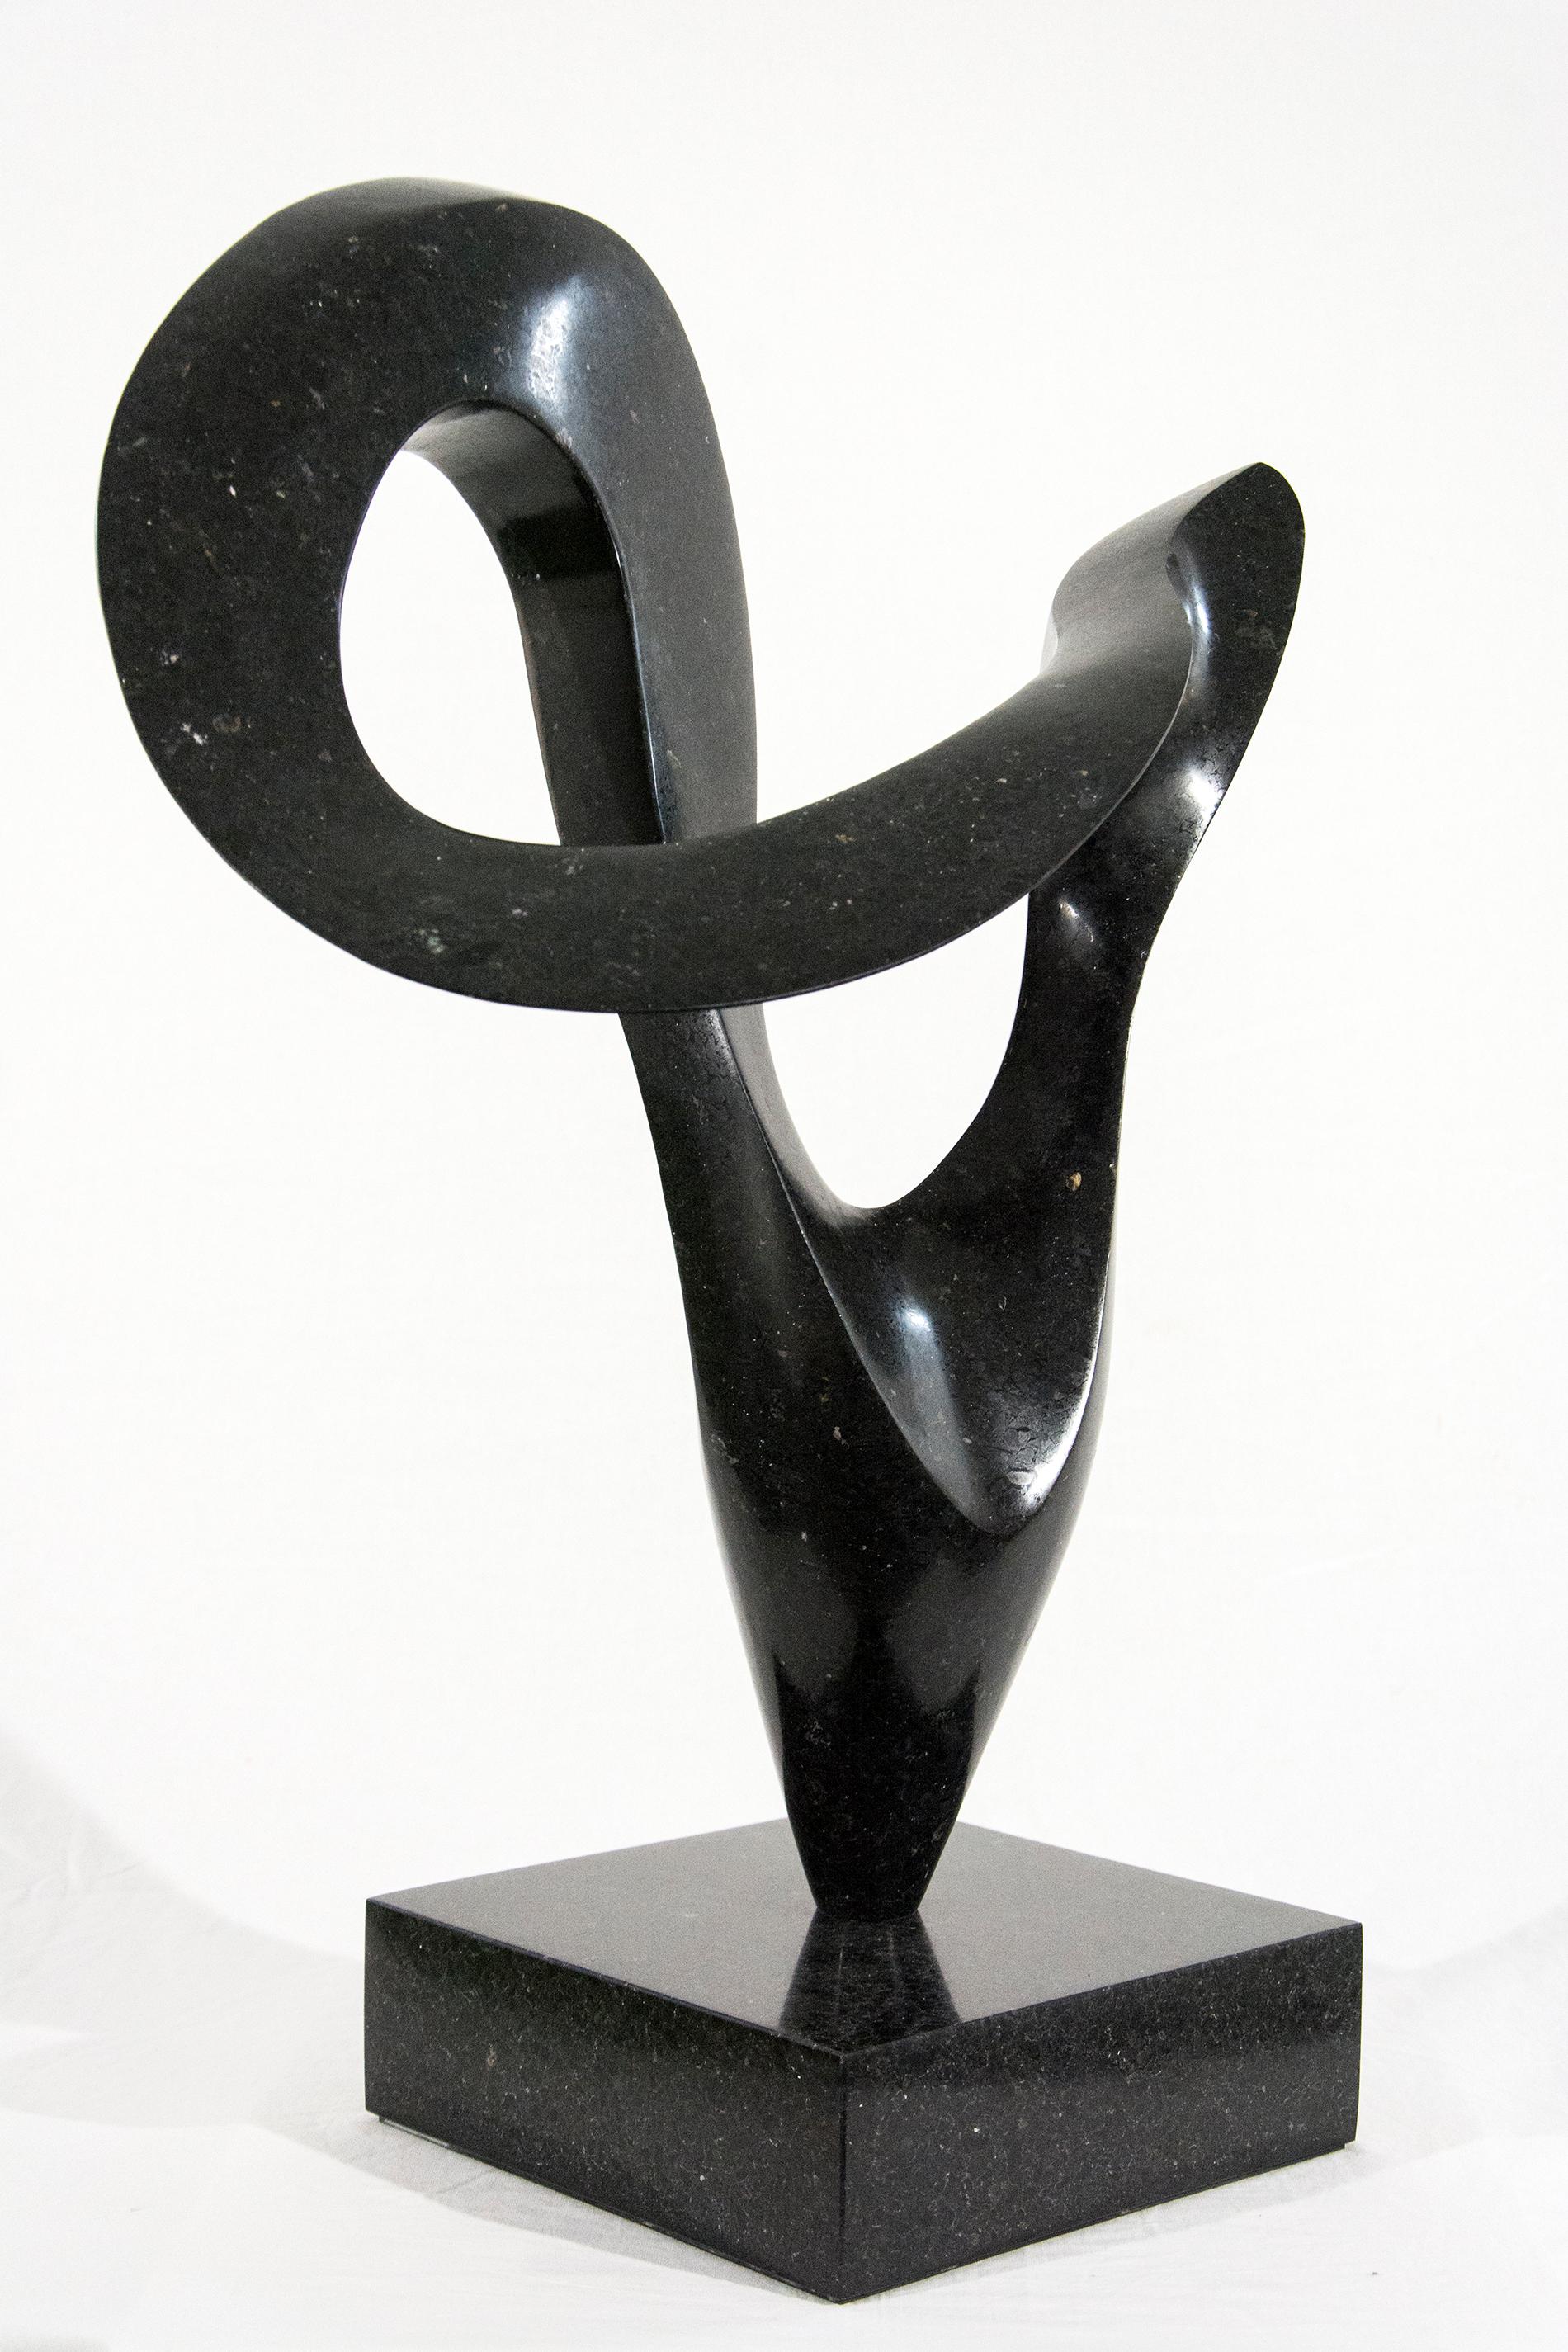 Smooth surfaced, engineered black granite is sculpted into an elegant, spinning form by Jeremy Guy. This lively shape that appears to spin dynamically on its narrow base, like a pirouette on one foot, is mounted on a granite base. It is number 14 in